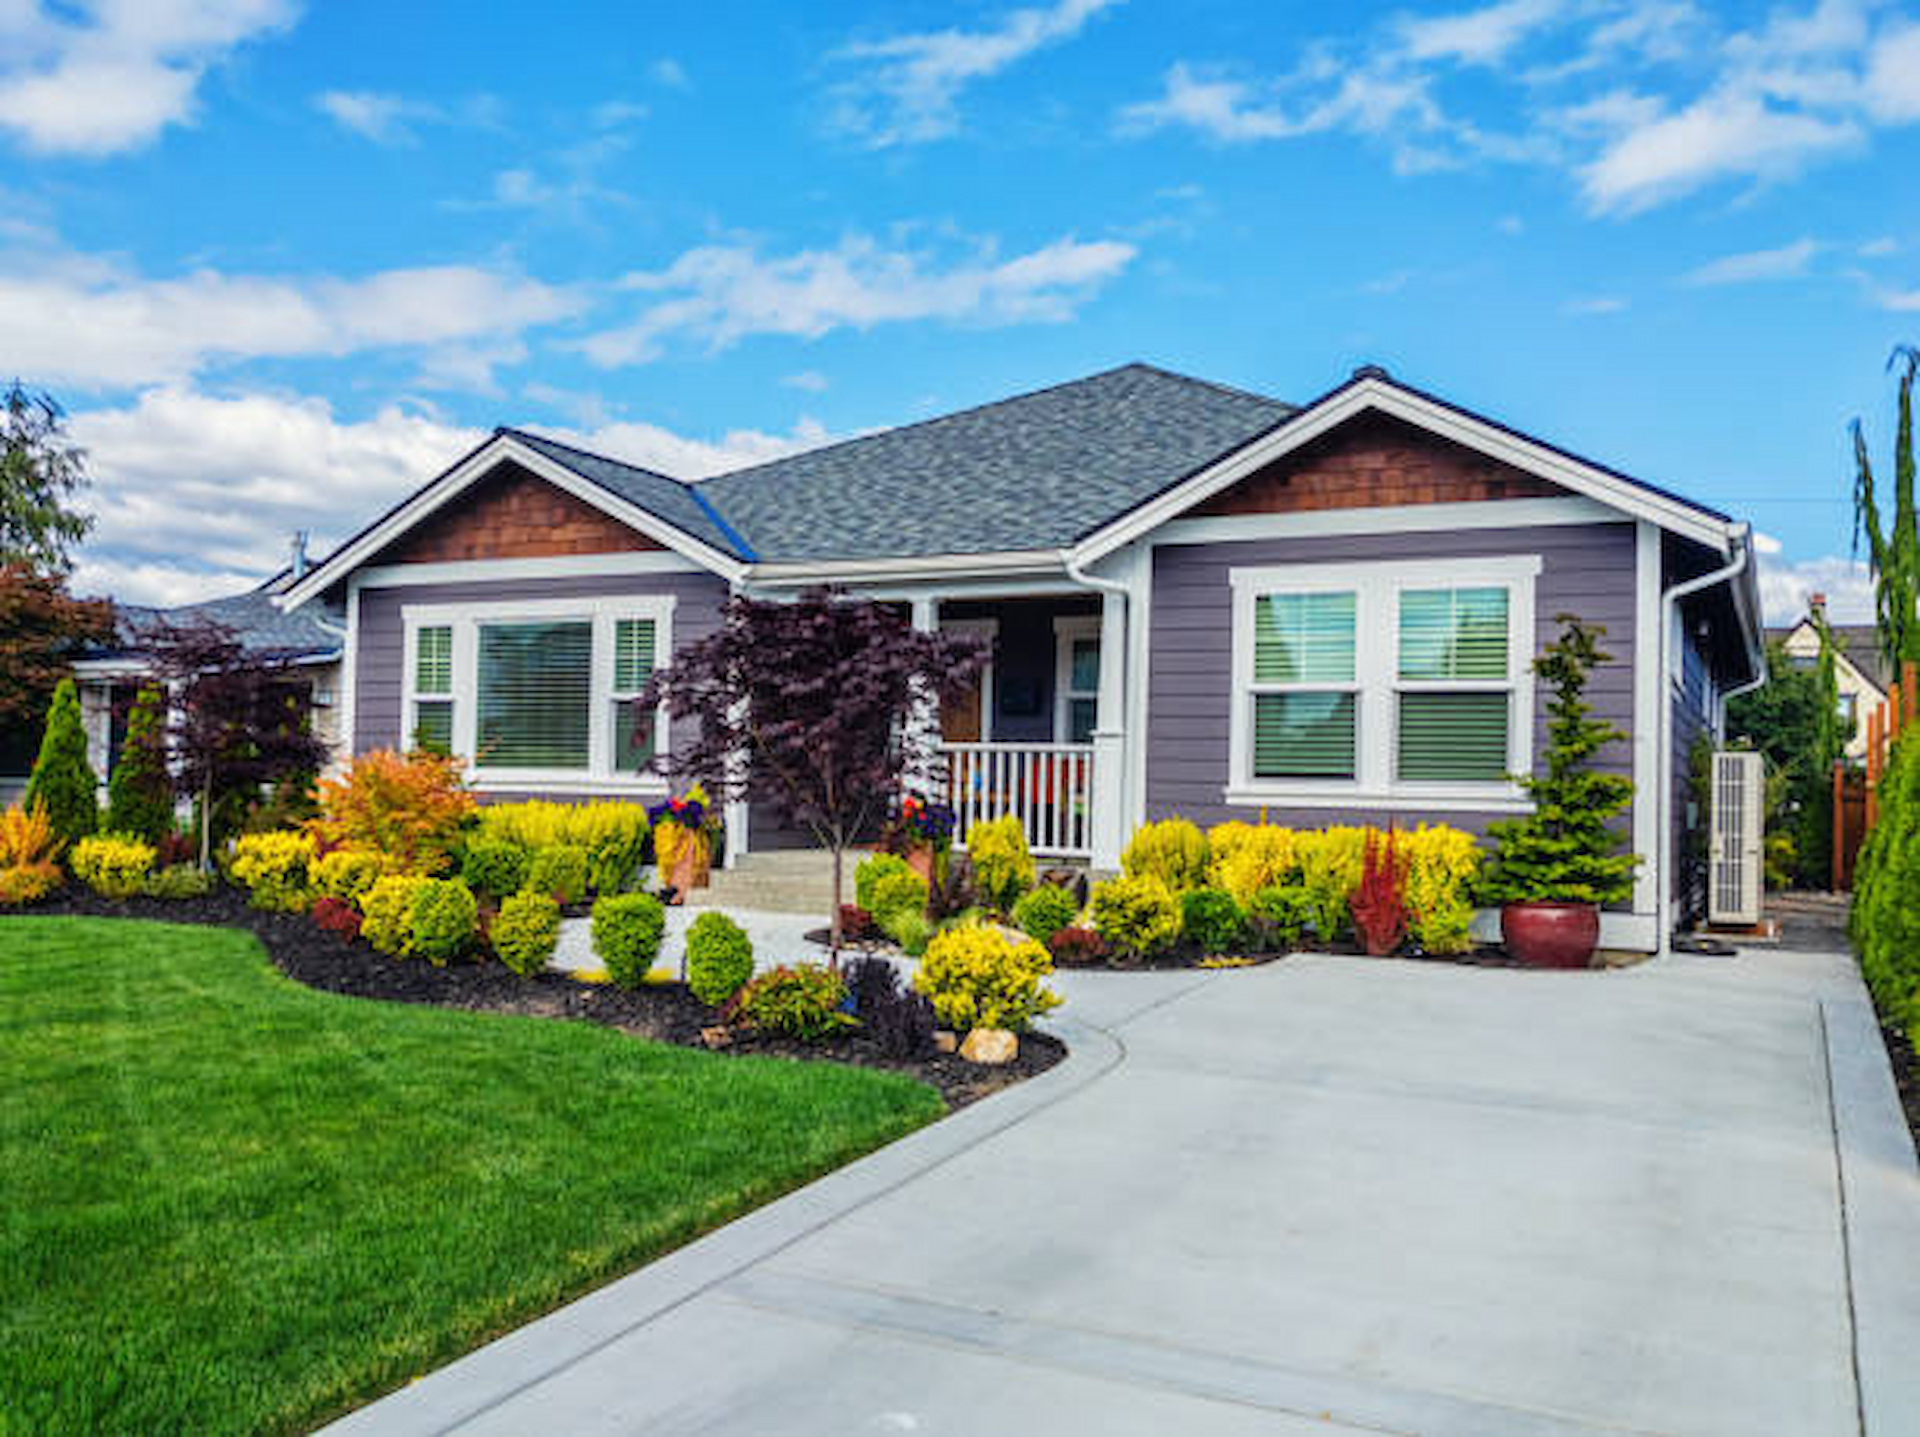 Key Factors To Consider Before Installing A Driveway In Your Home